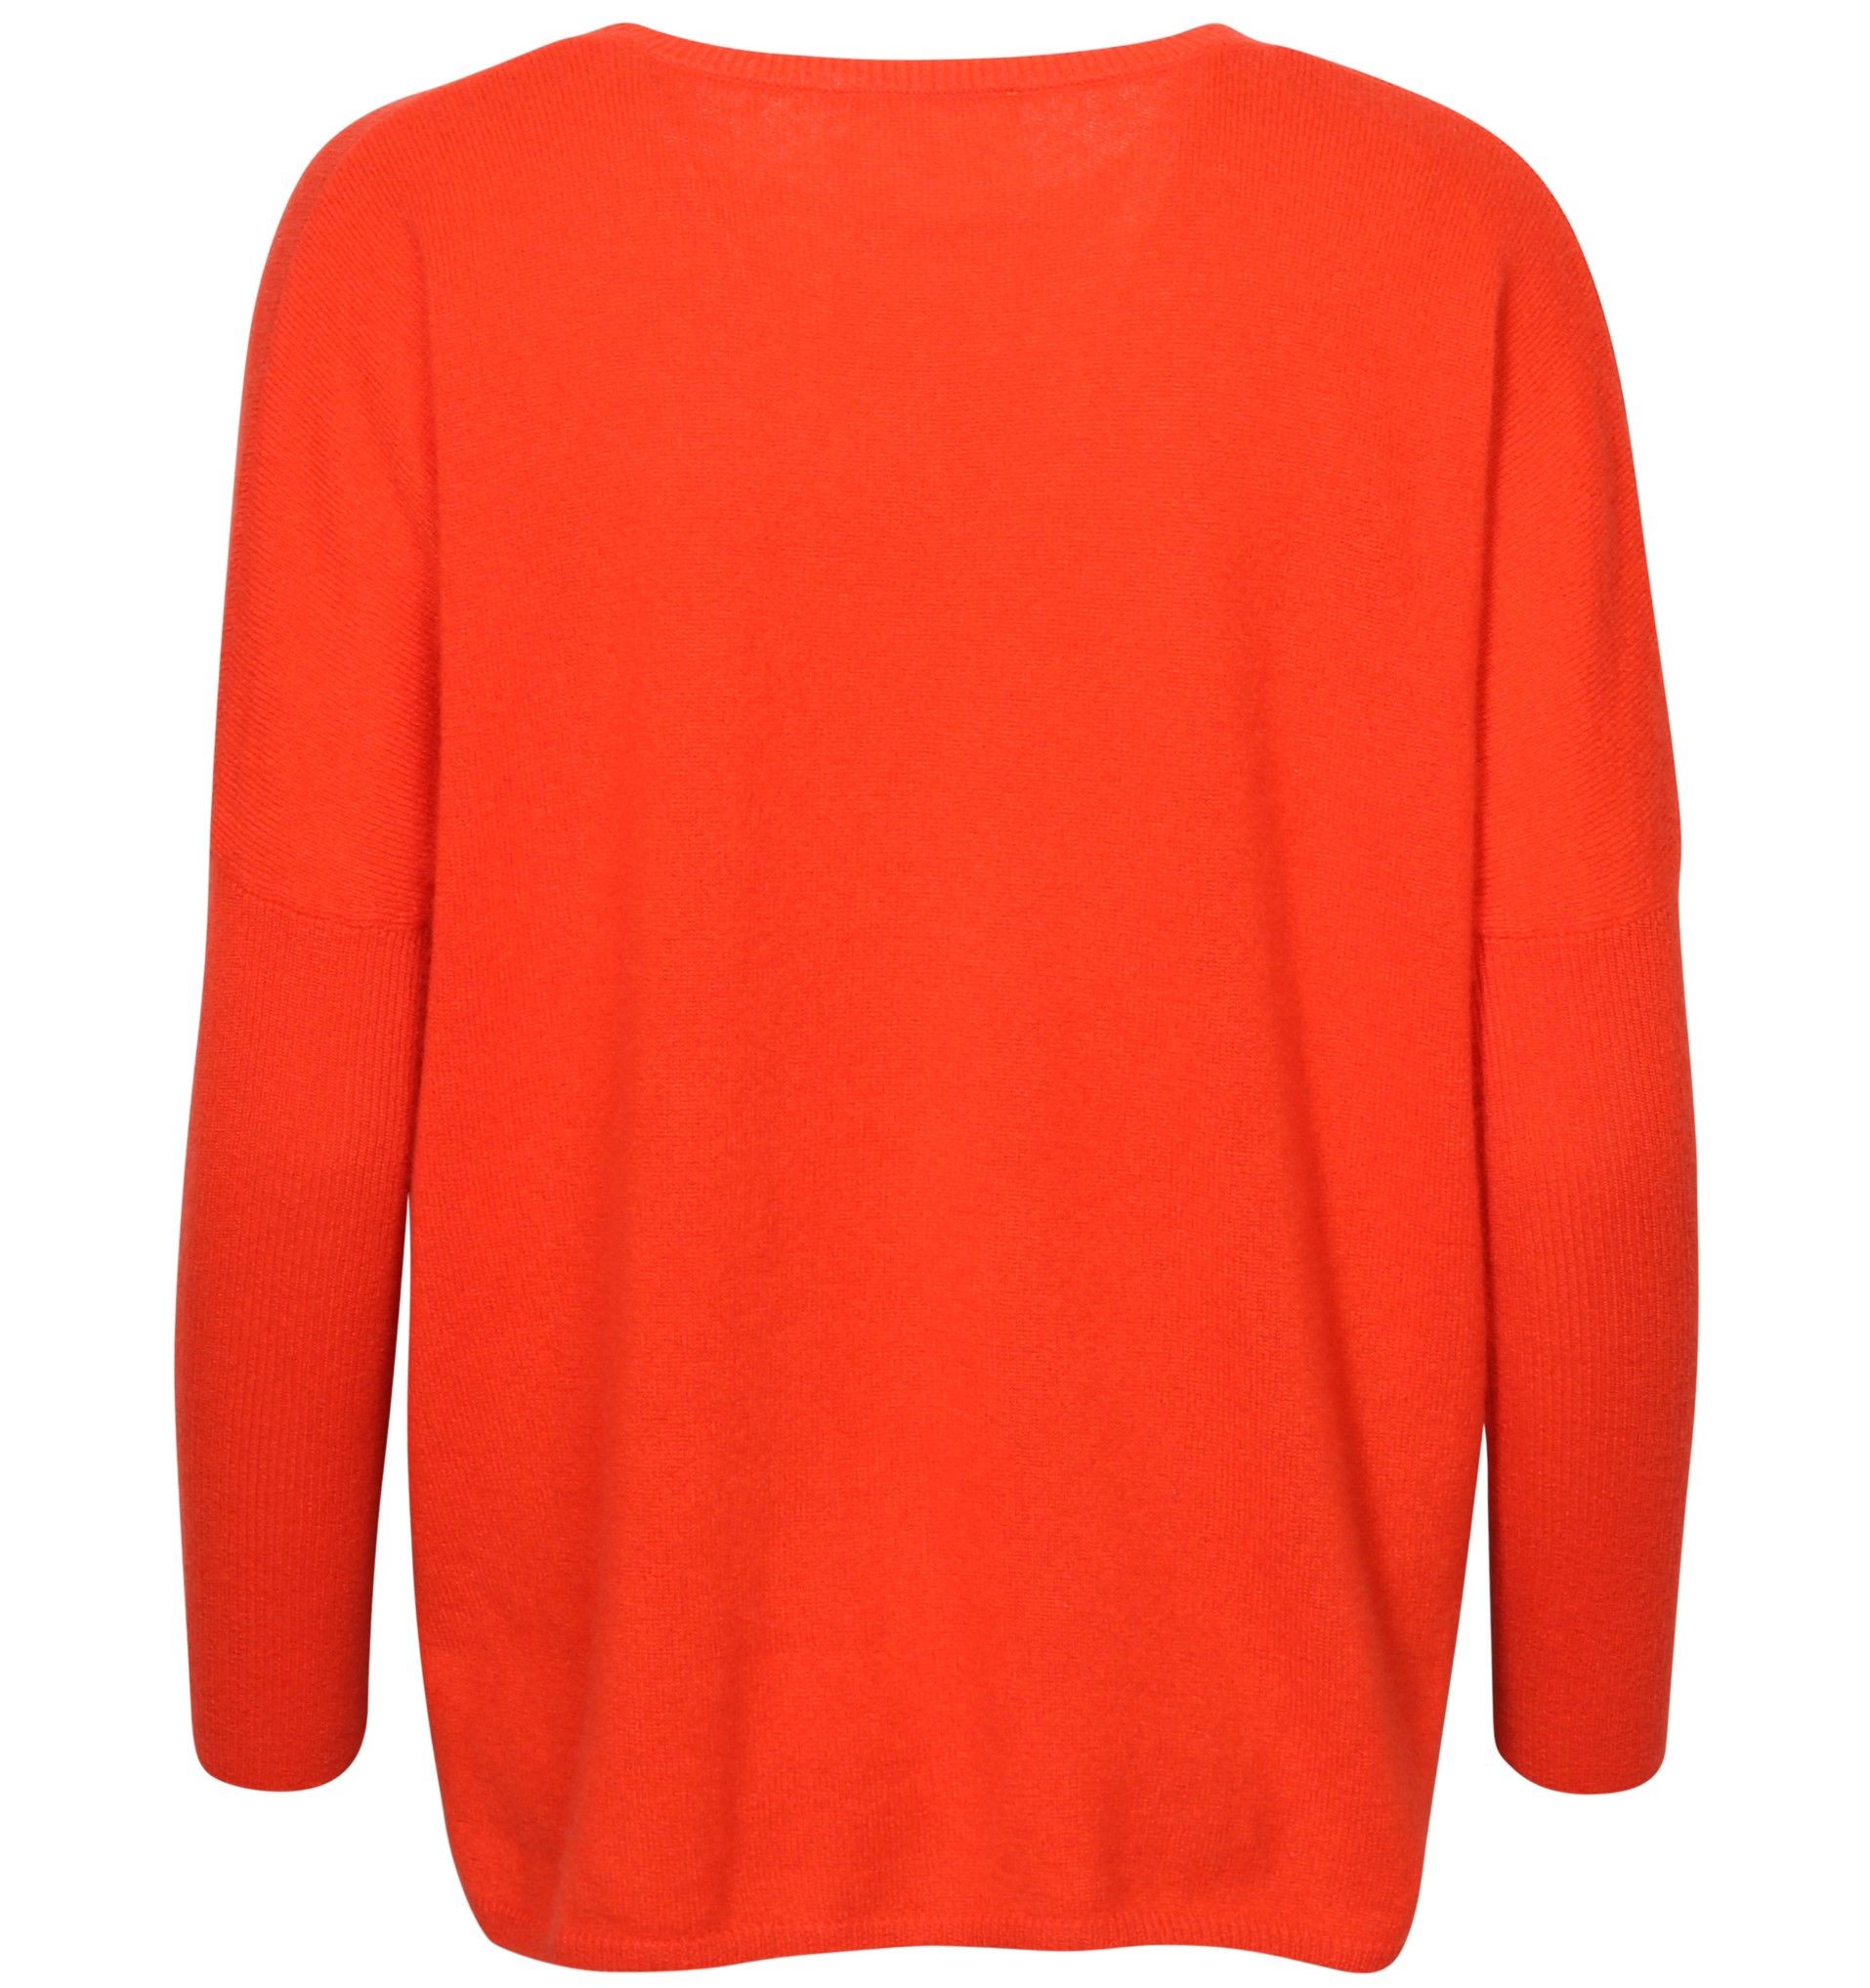 ABSOLUT CASHMERE Poncho Sweater Astrid in Orange M